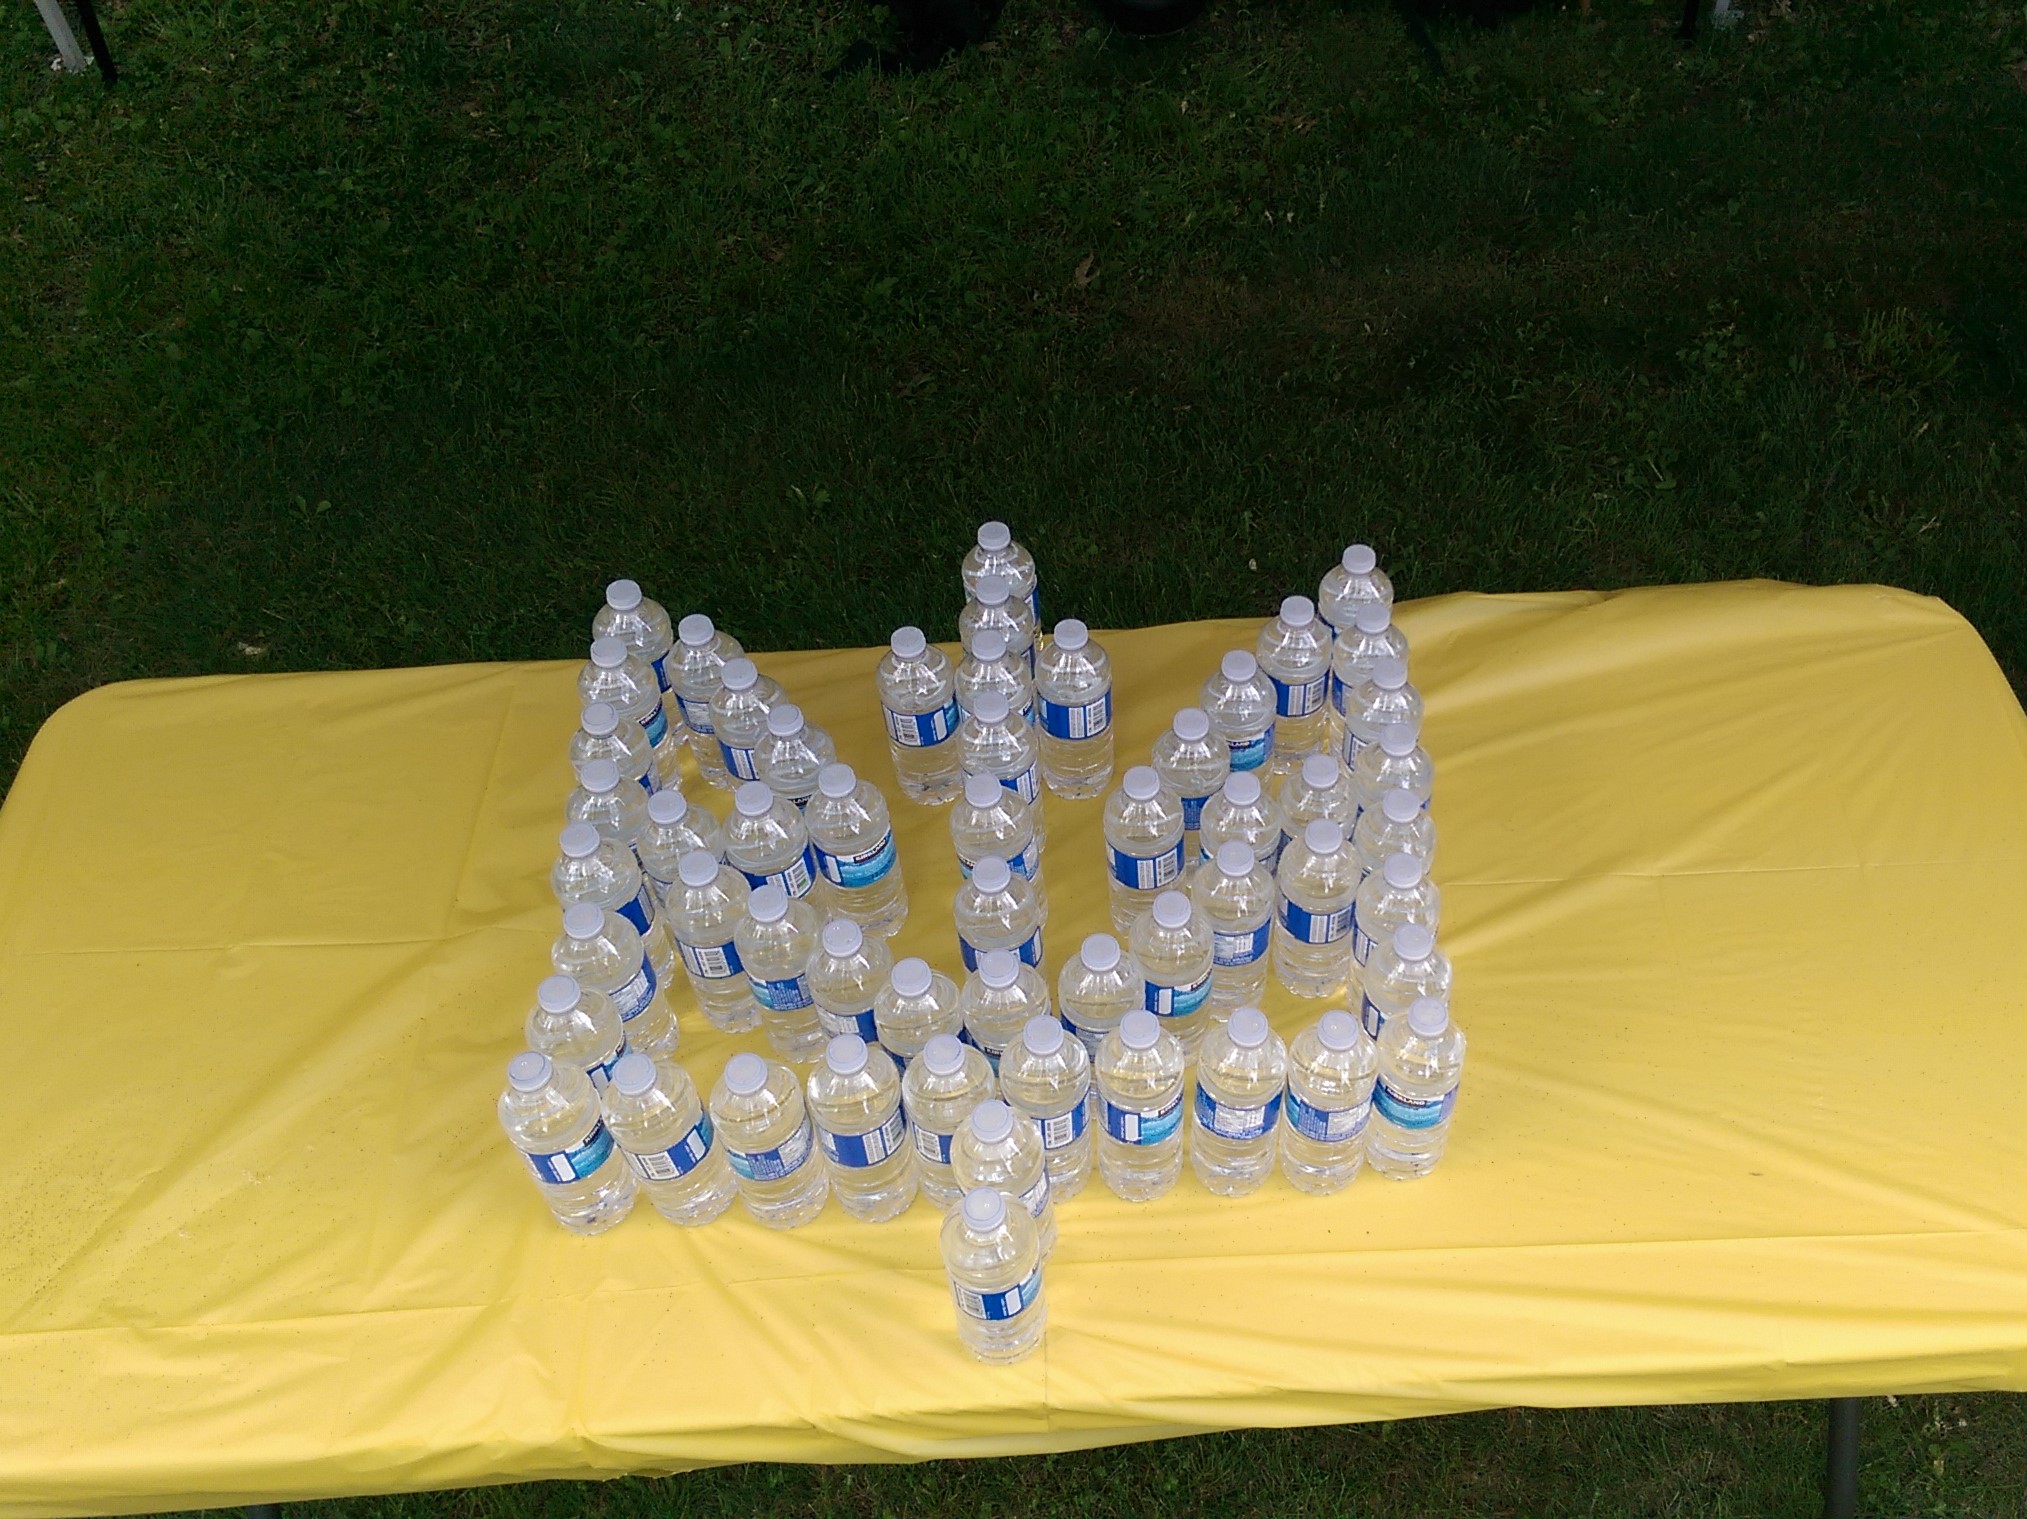 Ukrainian Coat of Arms symbol made from water bottles on a yellow table.